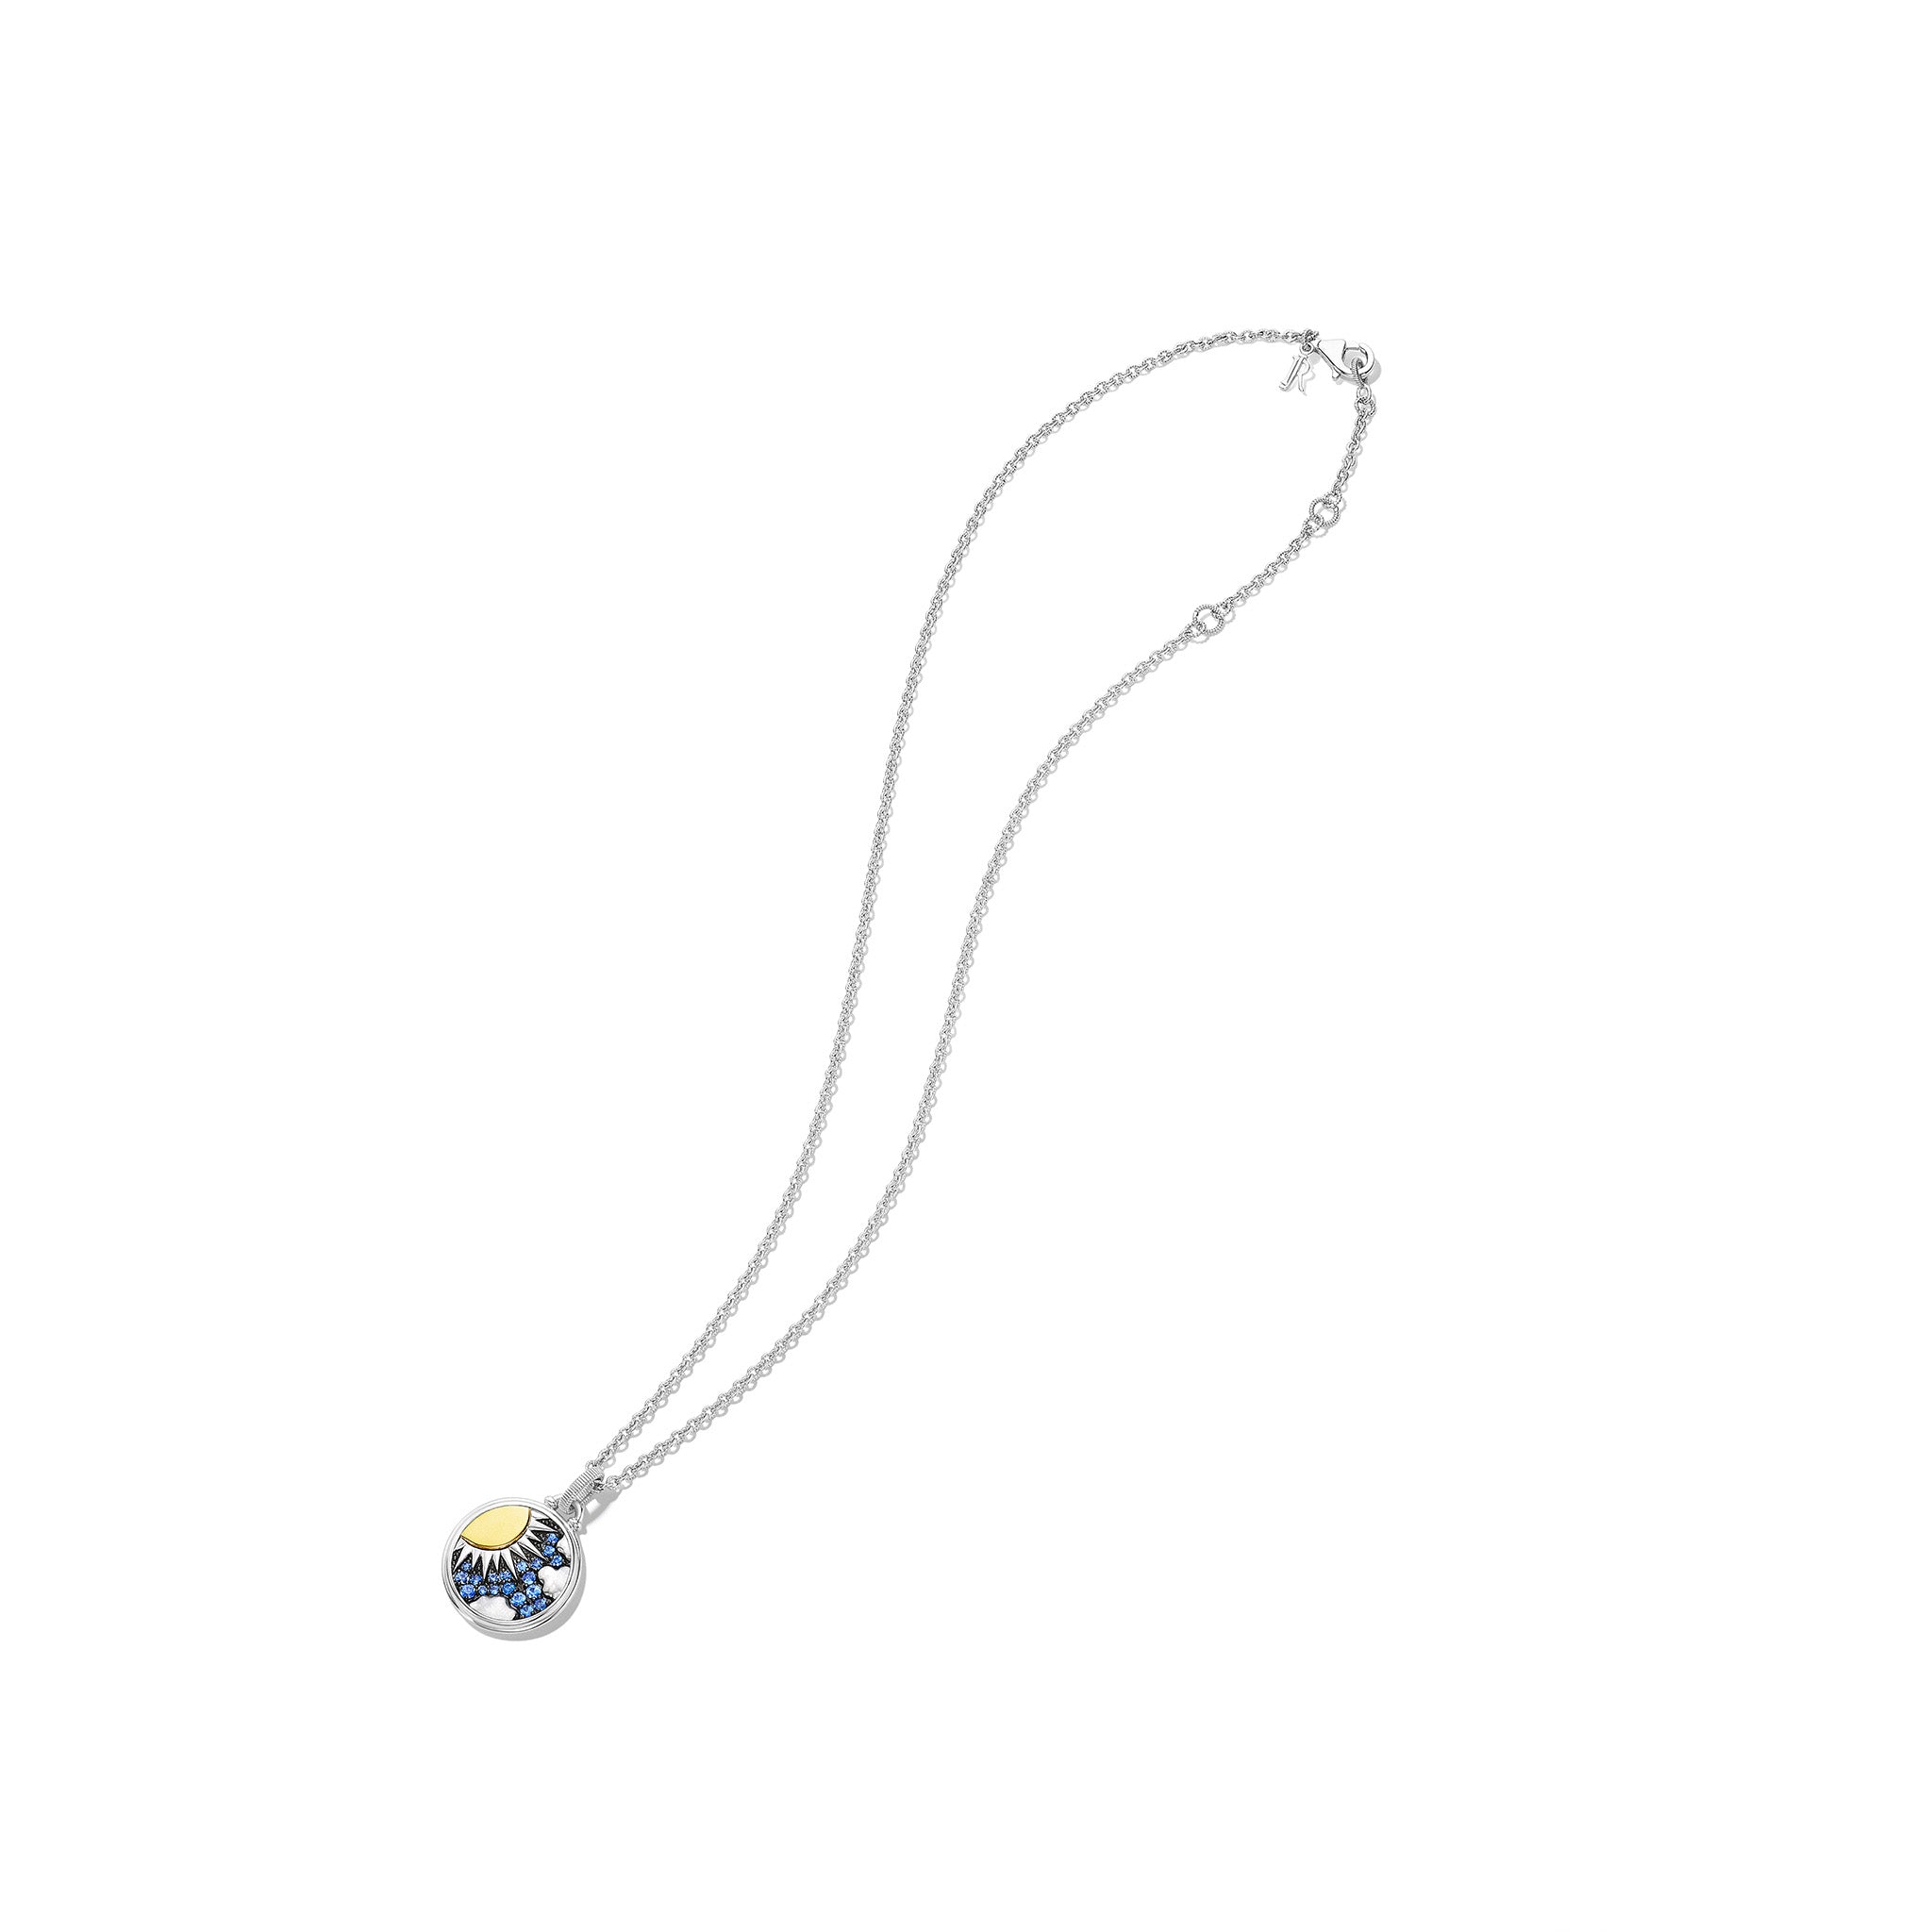 Little Luxuries Sunshine Medallion Necklace with Blue Sapphire, Diamonds and 18K Gold